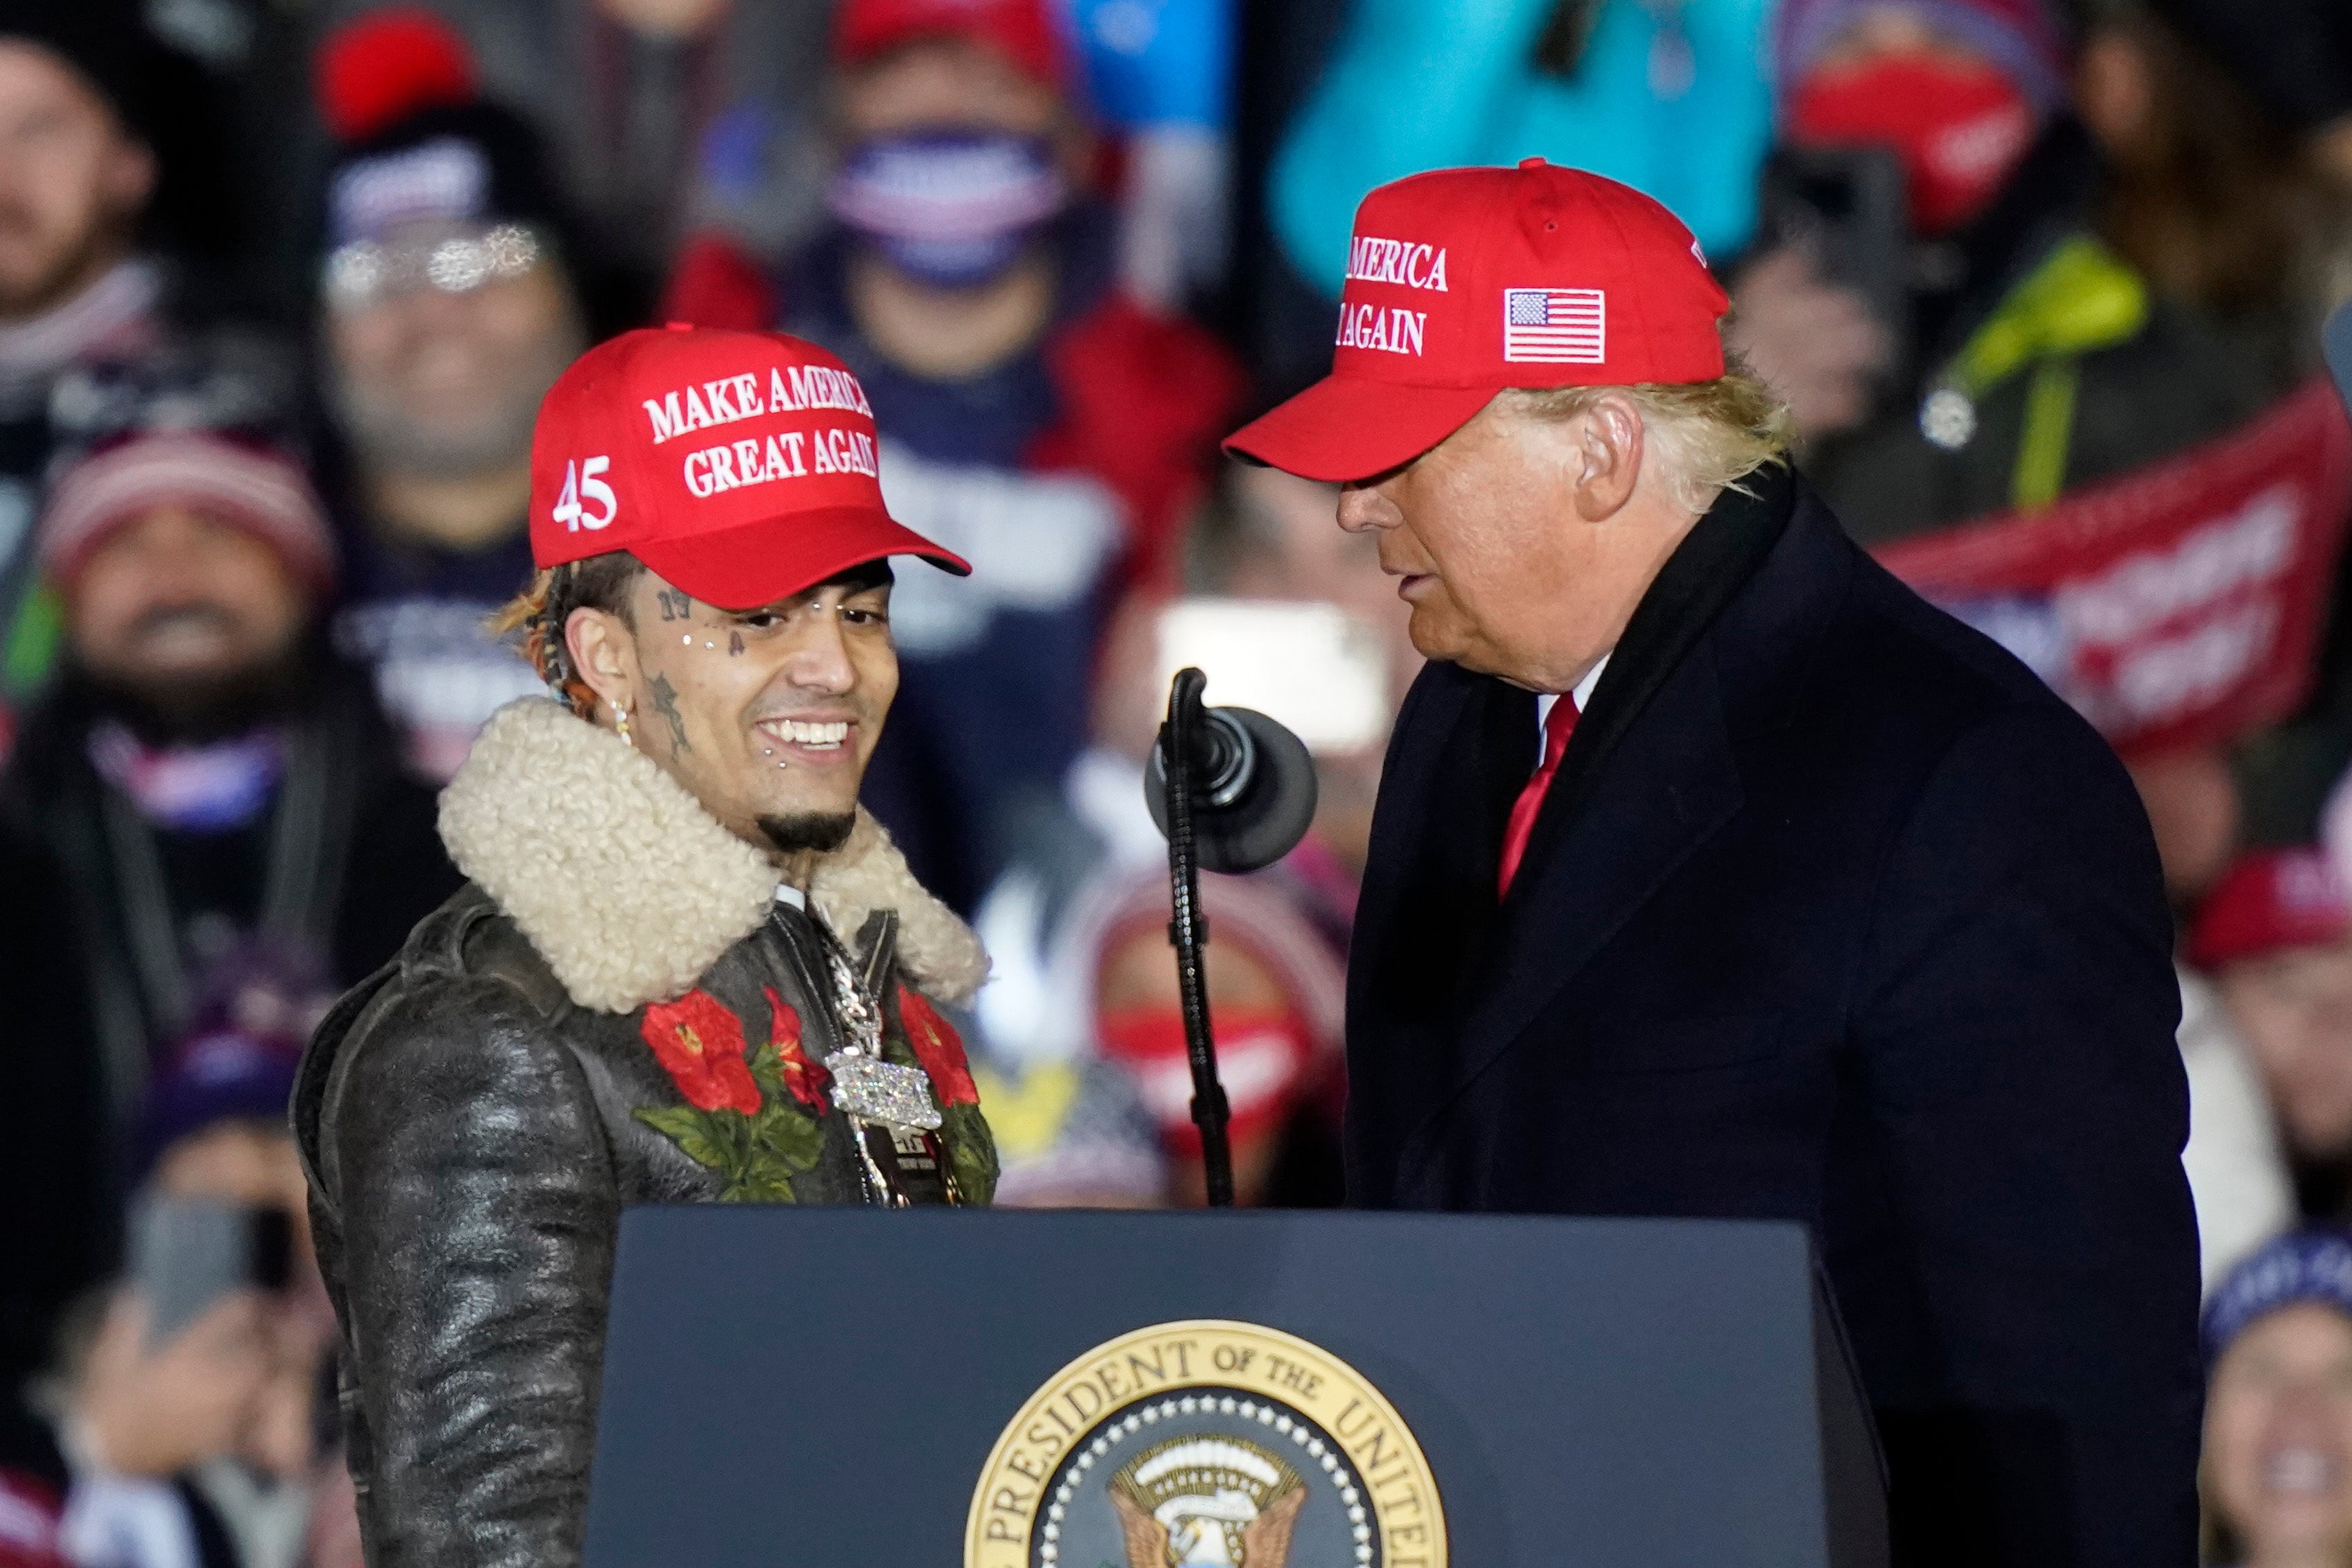 Trump support rapper Lil Pump was banned from flying after refusing to wear a mask